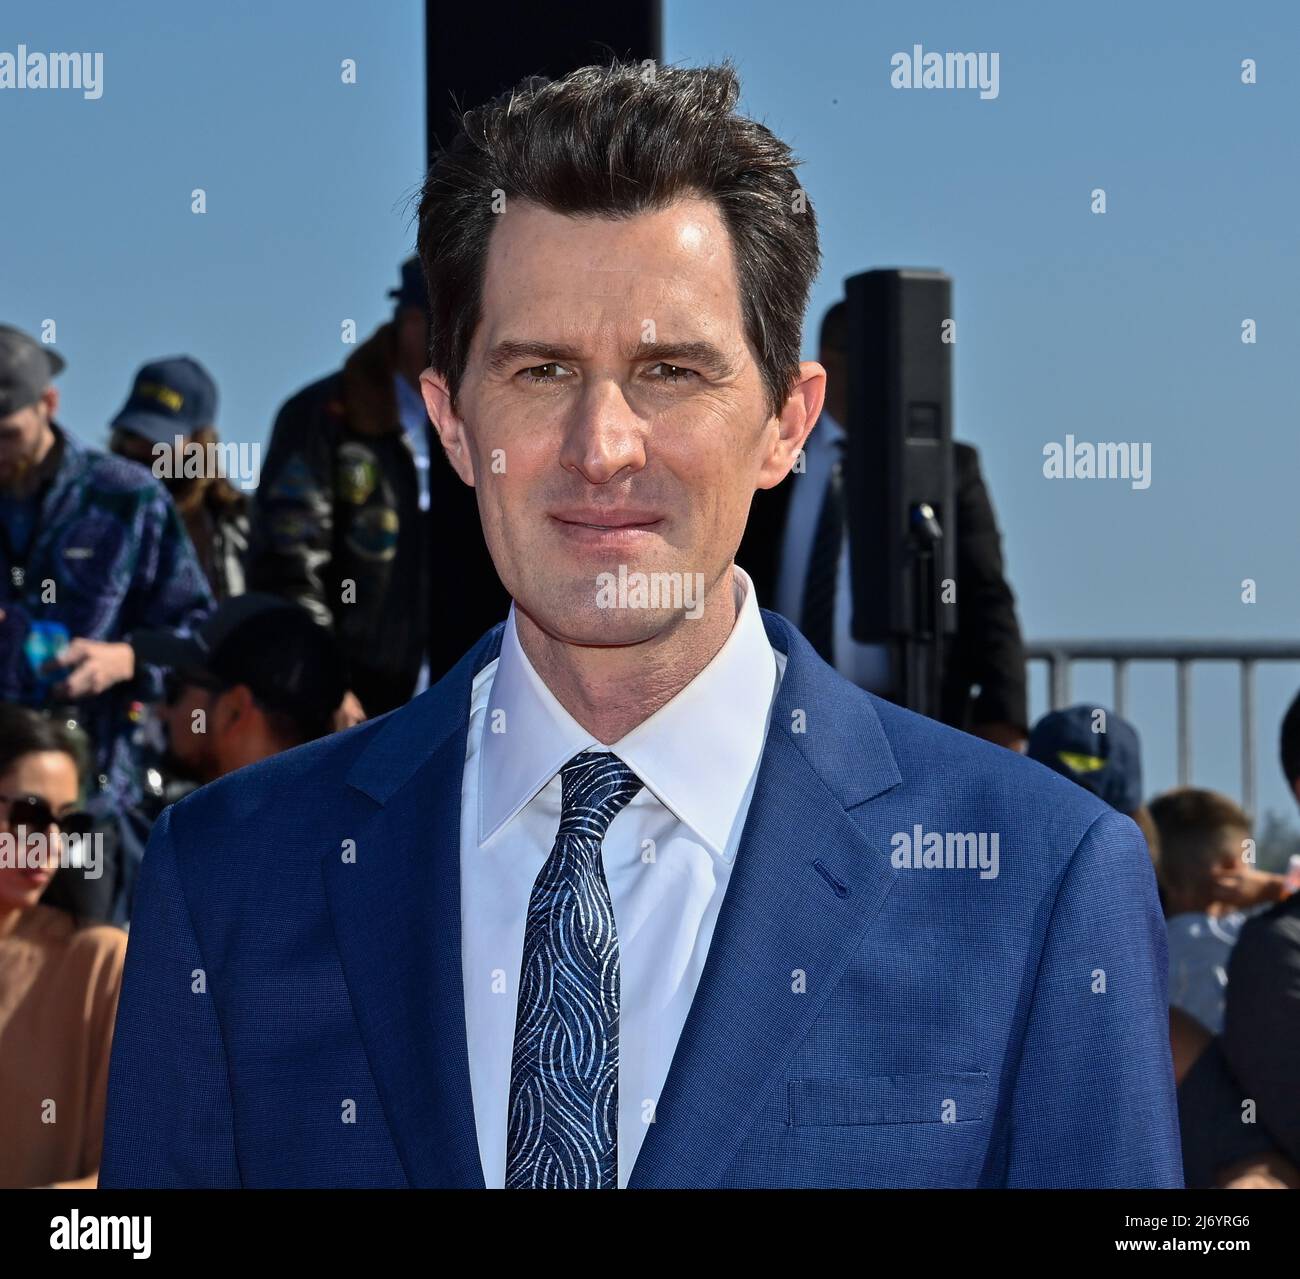 San Diego, United States. 05th May, 2022. Director Joseph Kosinski attends the premiere of the motion picture drama 'Top Gun: Maverick' at the USS Midway in San Diego, California on Wednesday, May 4, 2022. Photo by Jim Ruymen/UPI Credit: UPI/Alamy Live News Stock Photo